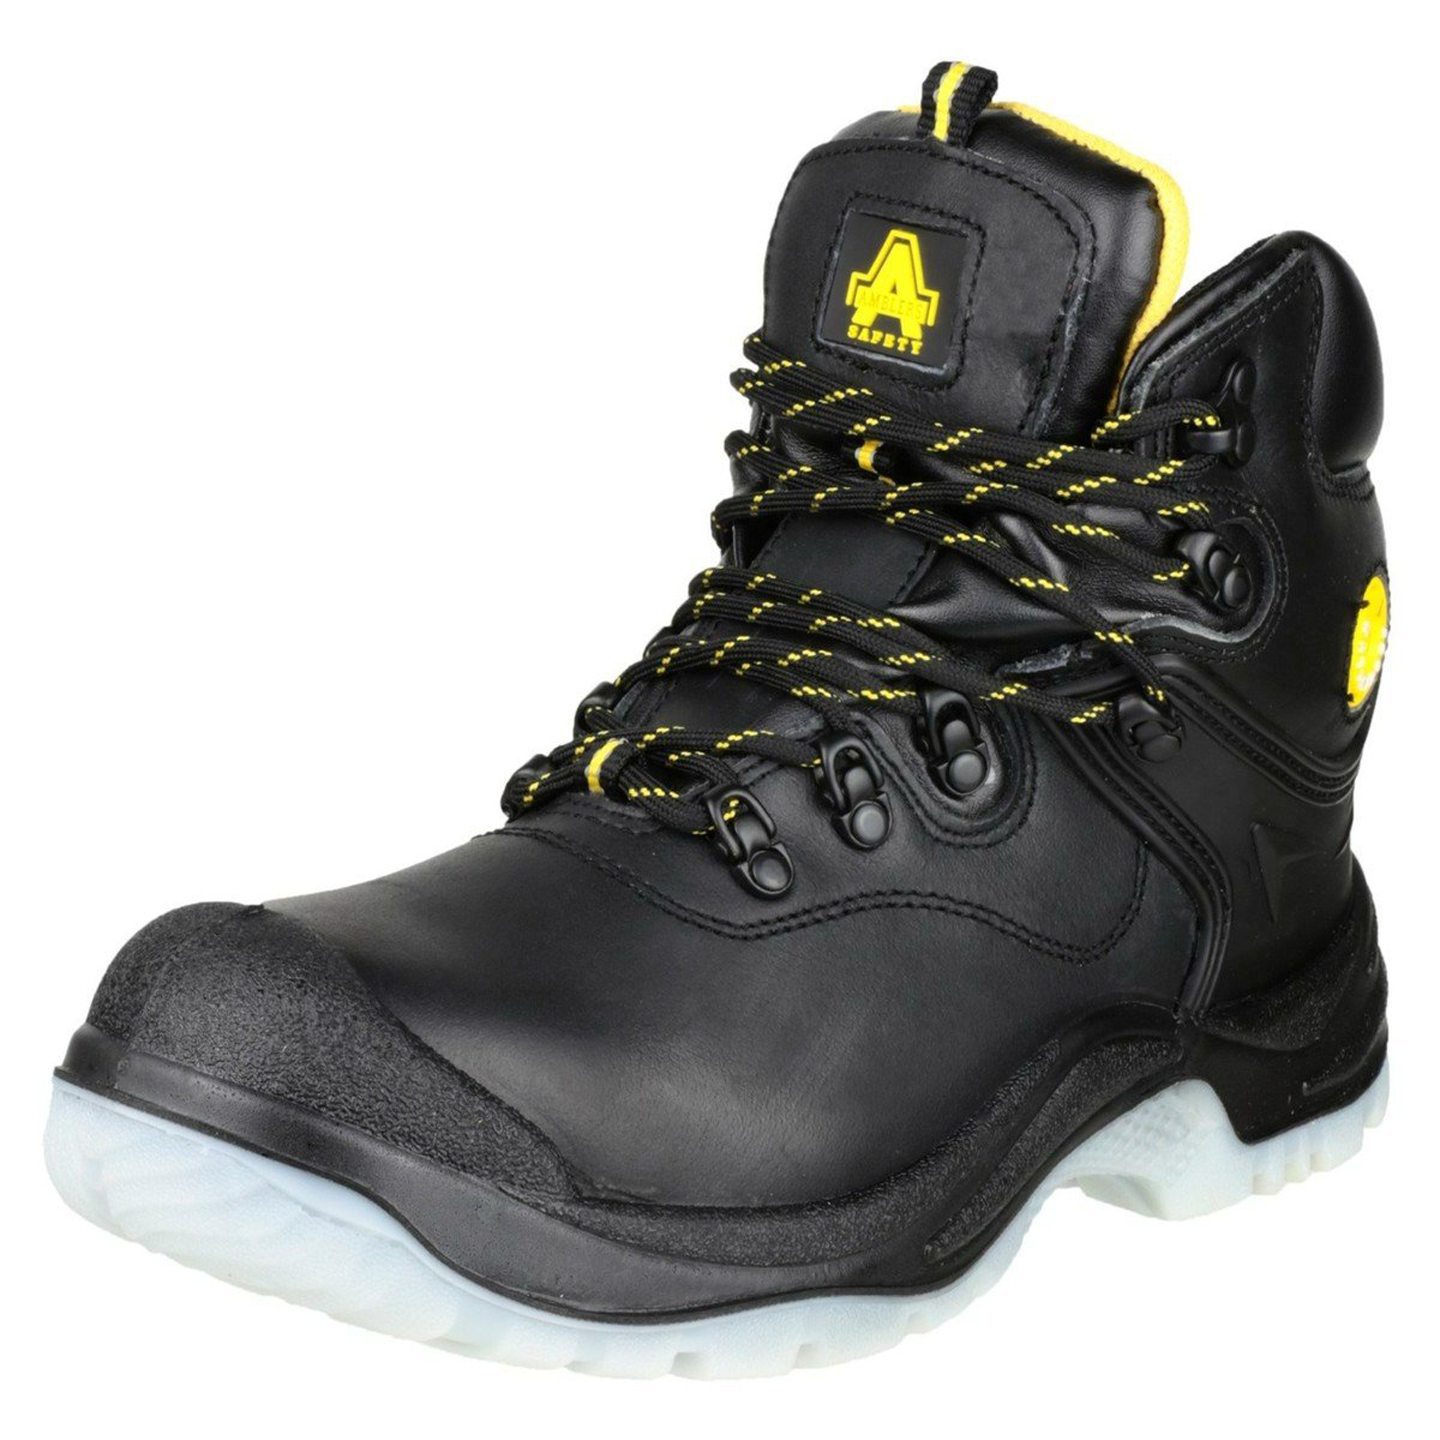 Ambler FS198 safety work boots for construction.